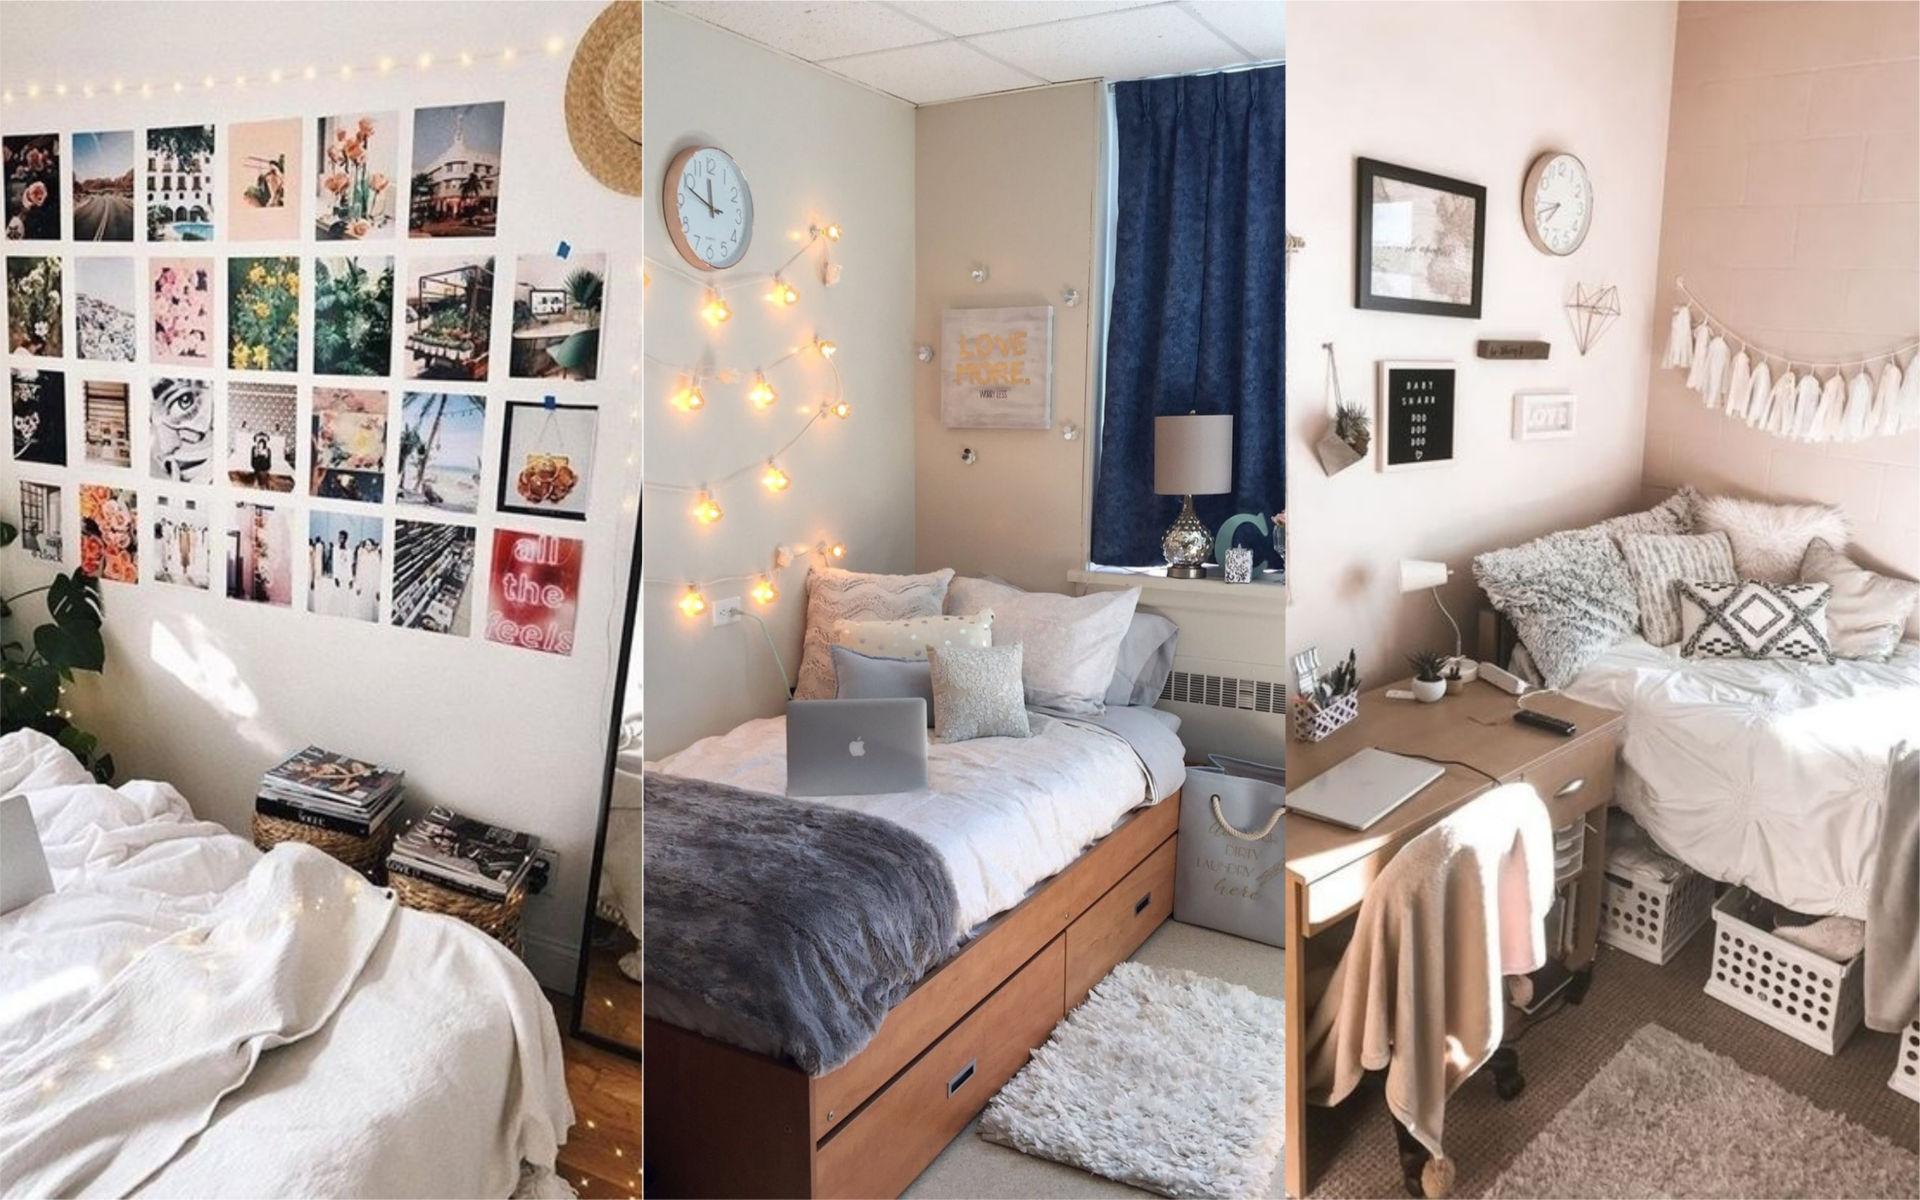 Get inspired by these uni room decoration ideas for your college dorm